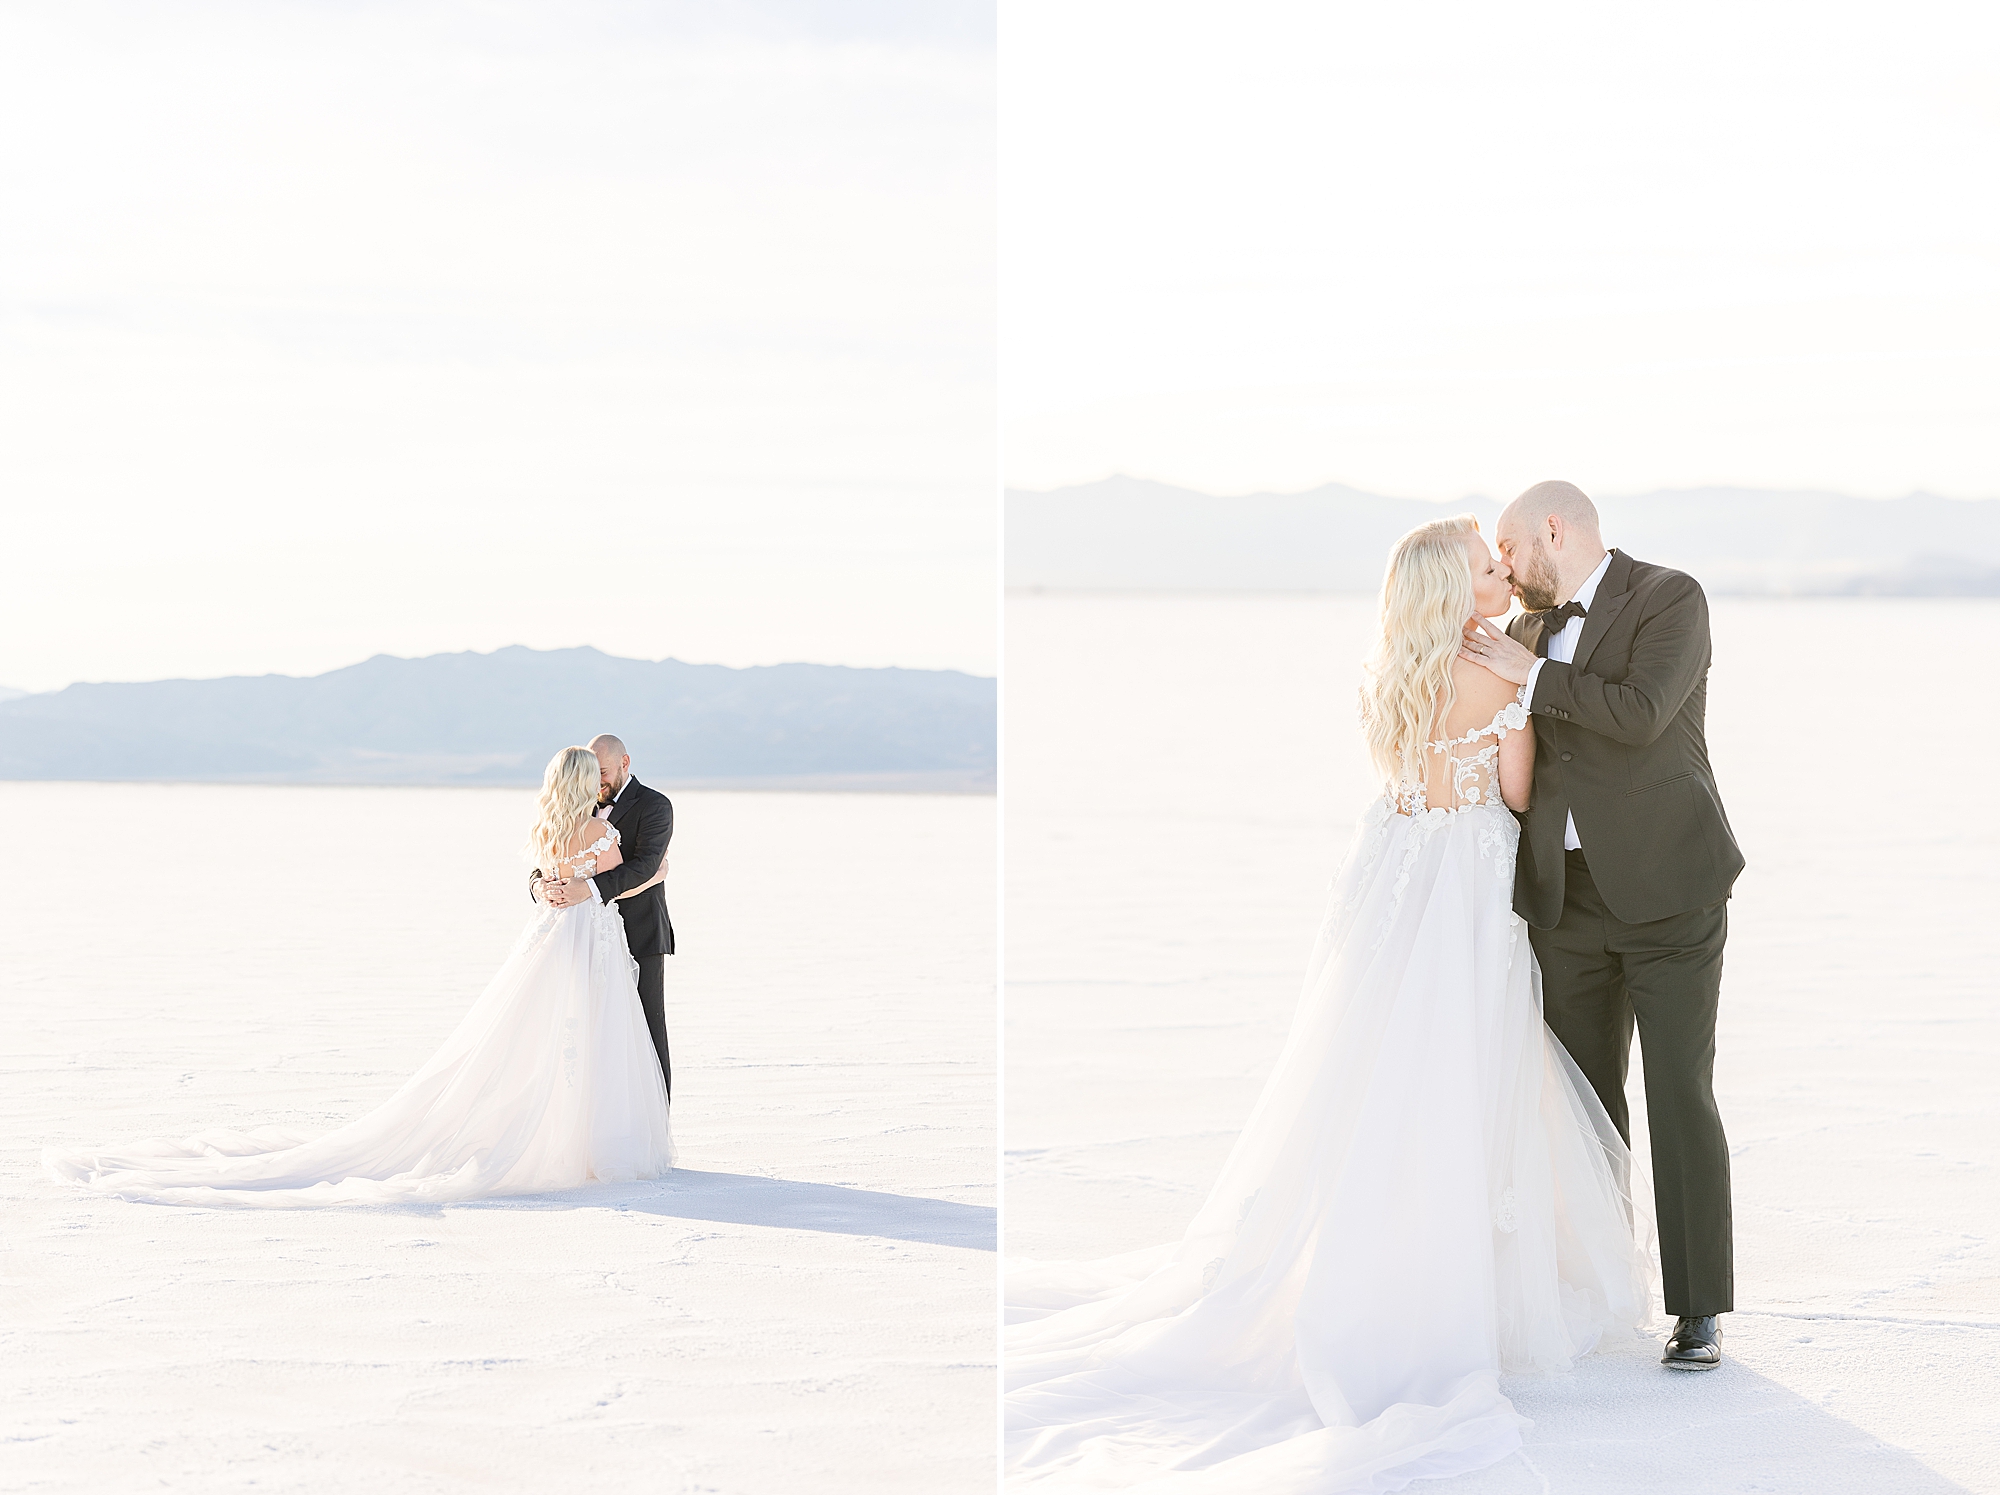 Wedding couple with the natural beauty of the Bonneville Salt Flats in the background